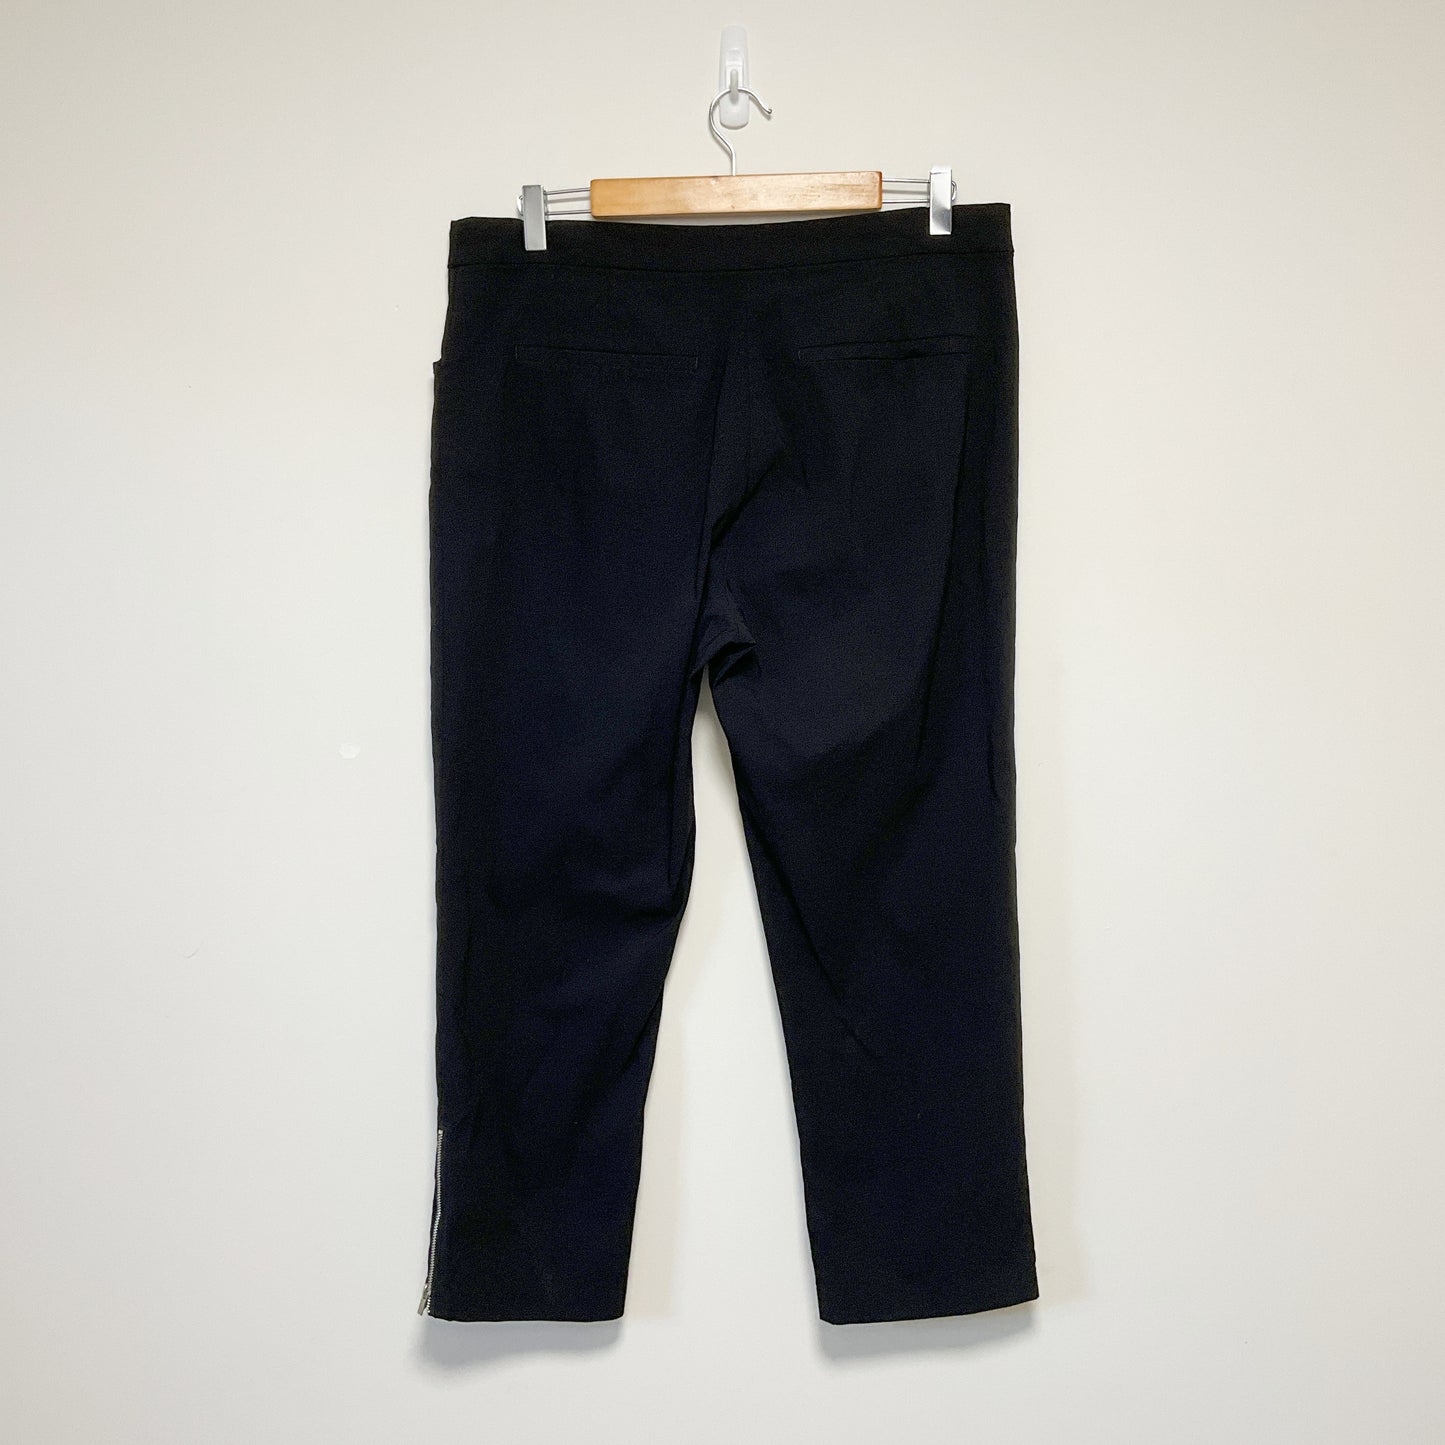 Spirit - Stretchy Pants With Ankle Zippers And Pockets